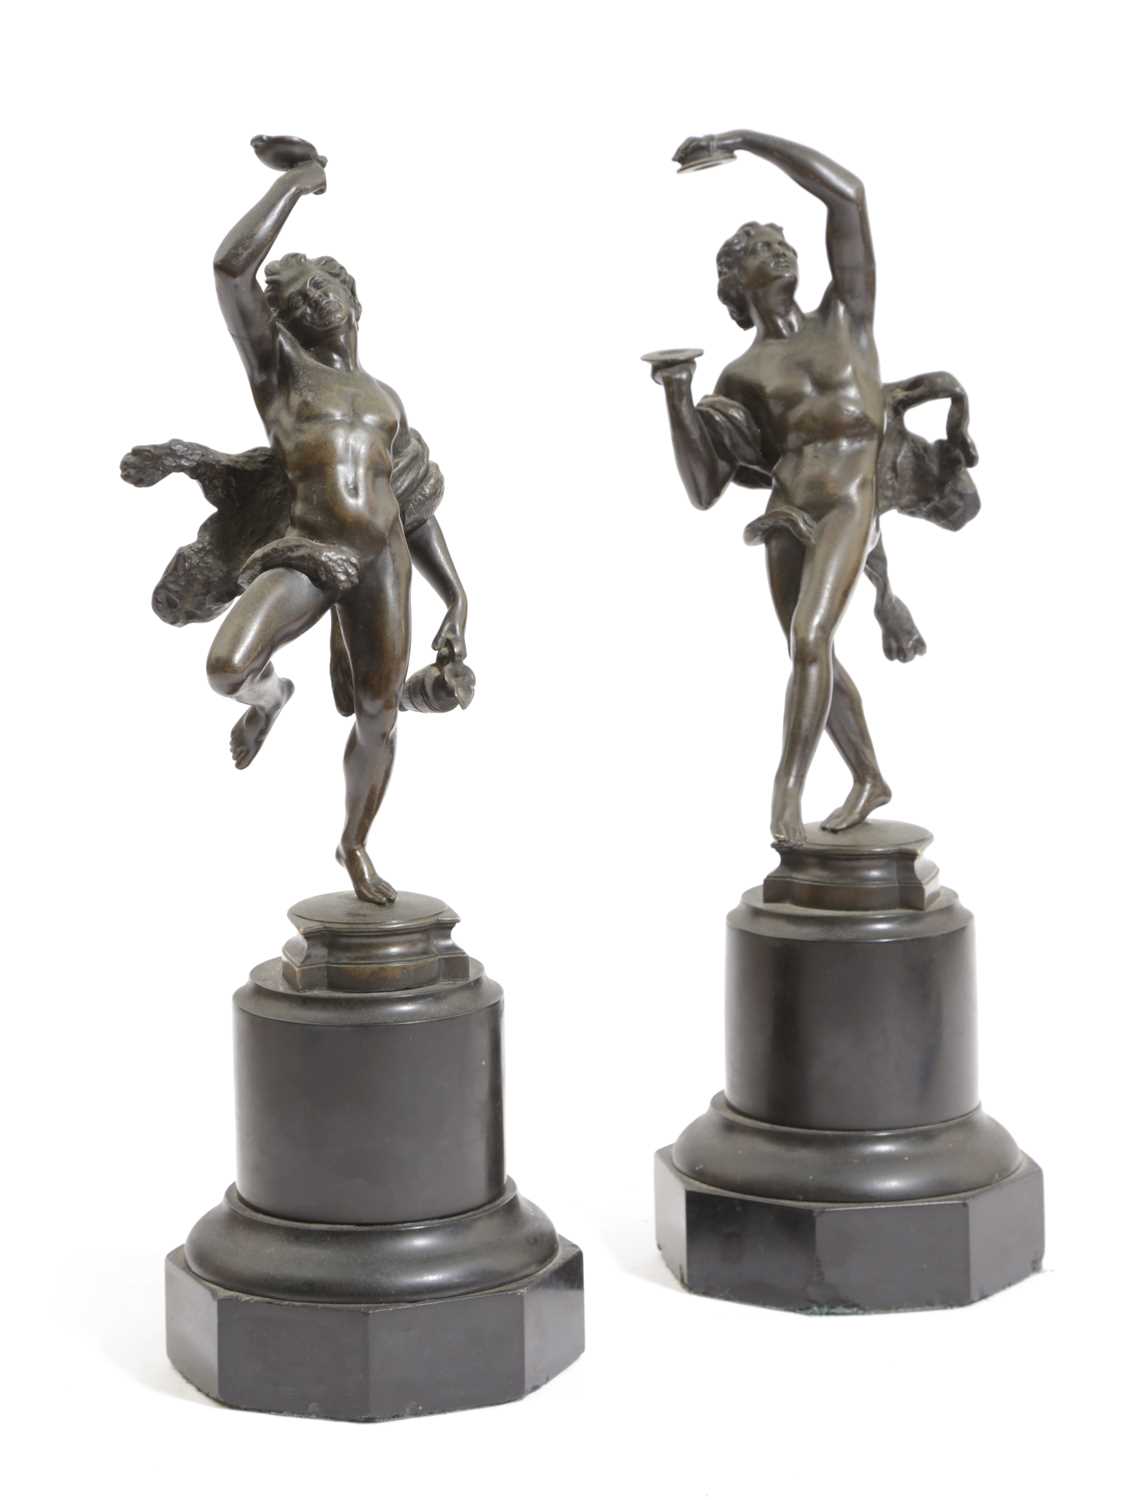 A PAIR OF FRENCH BRONZE GRAND TOUR FIGURES OF SATYRS AFTER THE ANTIQUE, 19TH CENTURY each modelled